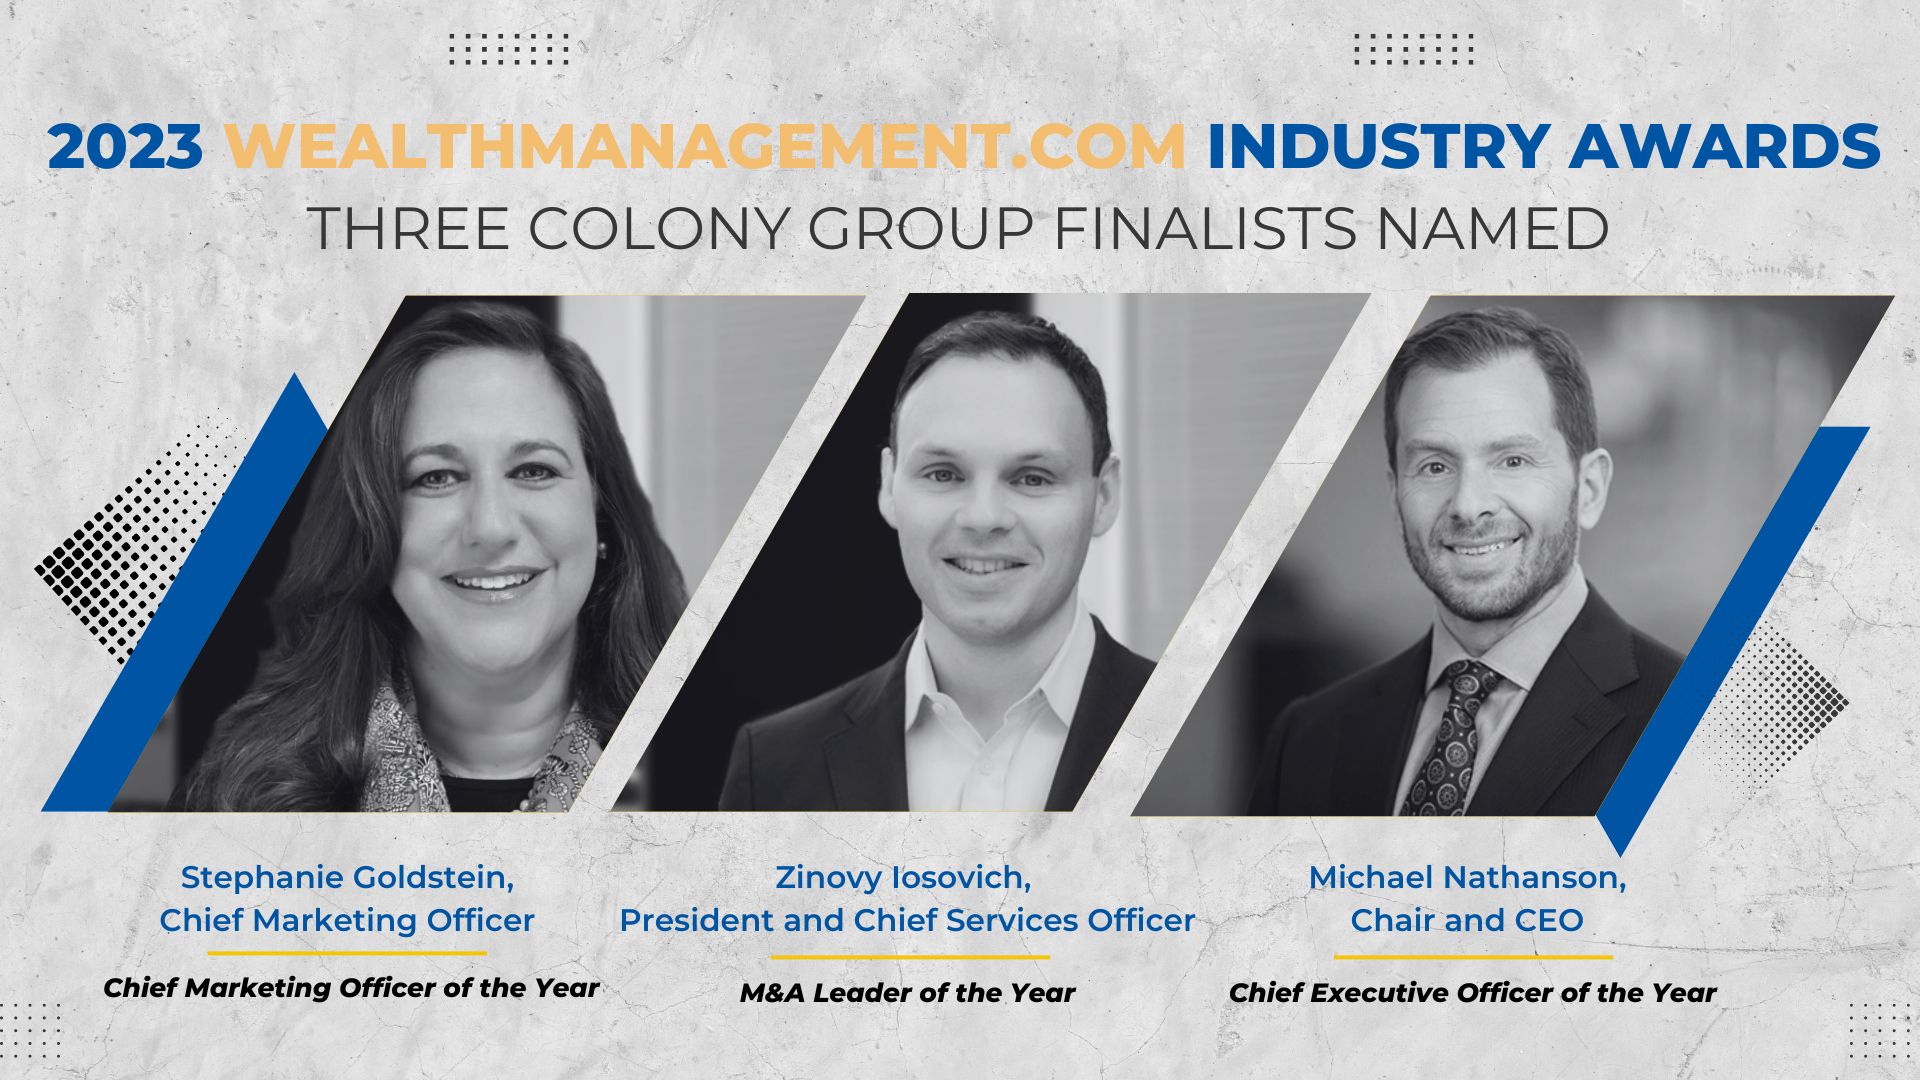 “Wealthies” 2023 Industry Awards Name Three Colony Group Finalists (6)